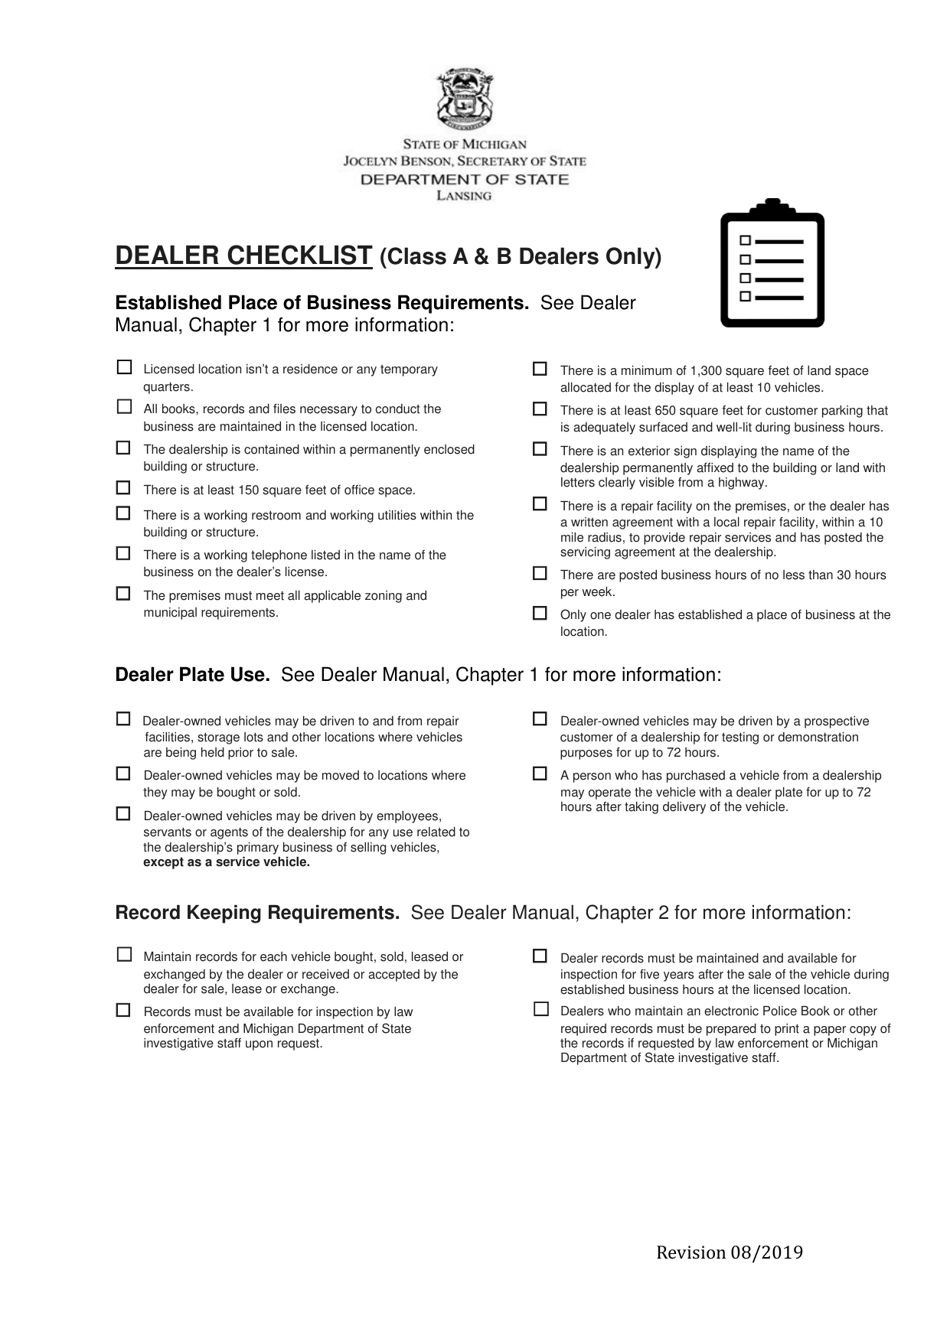 Dealer Checklist (Class a  B Dealers Only) - Michigan, Page 1